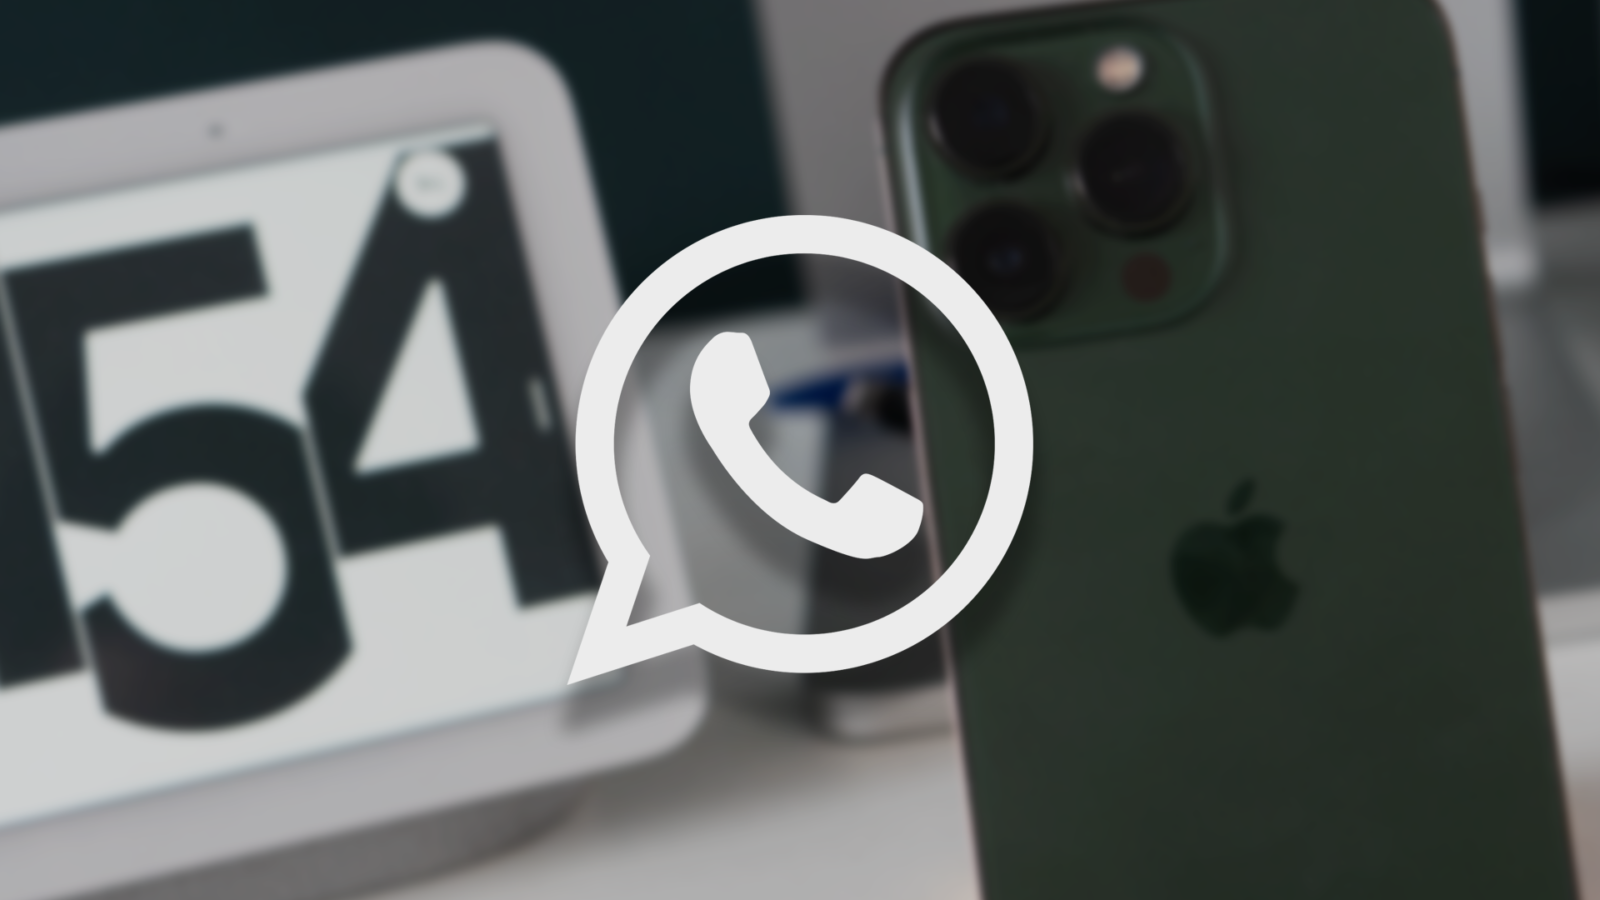 How to use WhatsApp as FaceTime soon